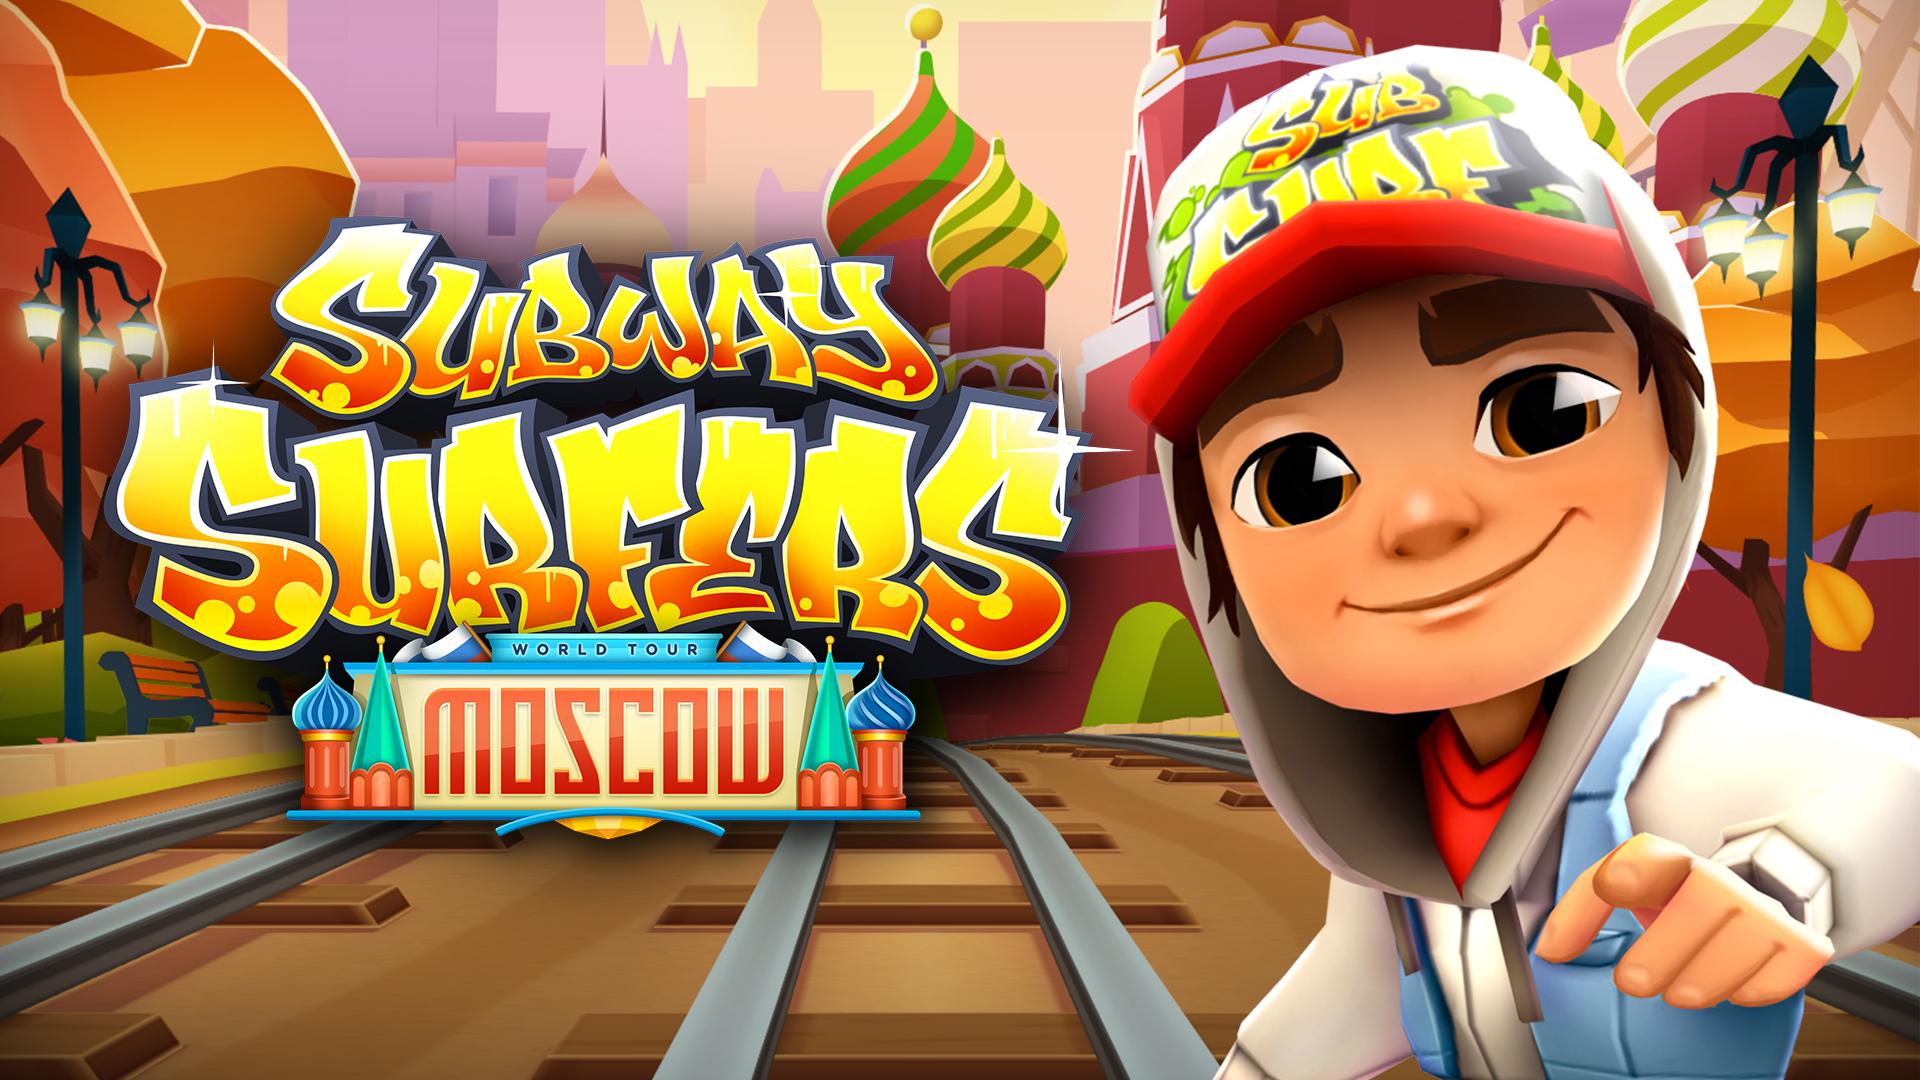 Subway Surfers for Android - APK Download